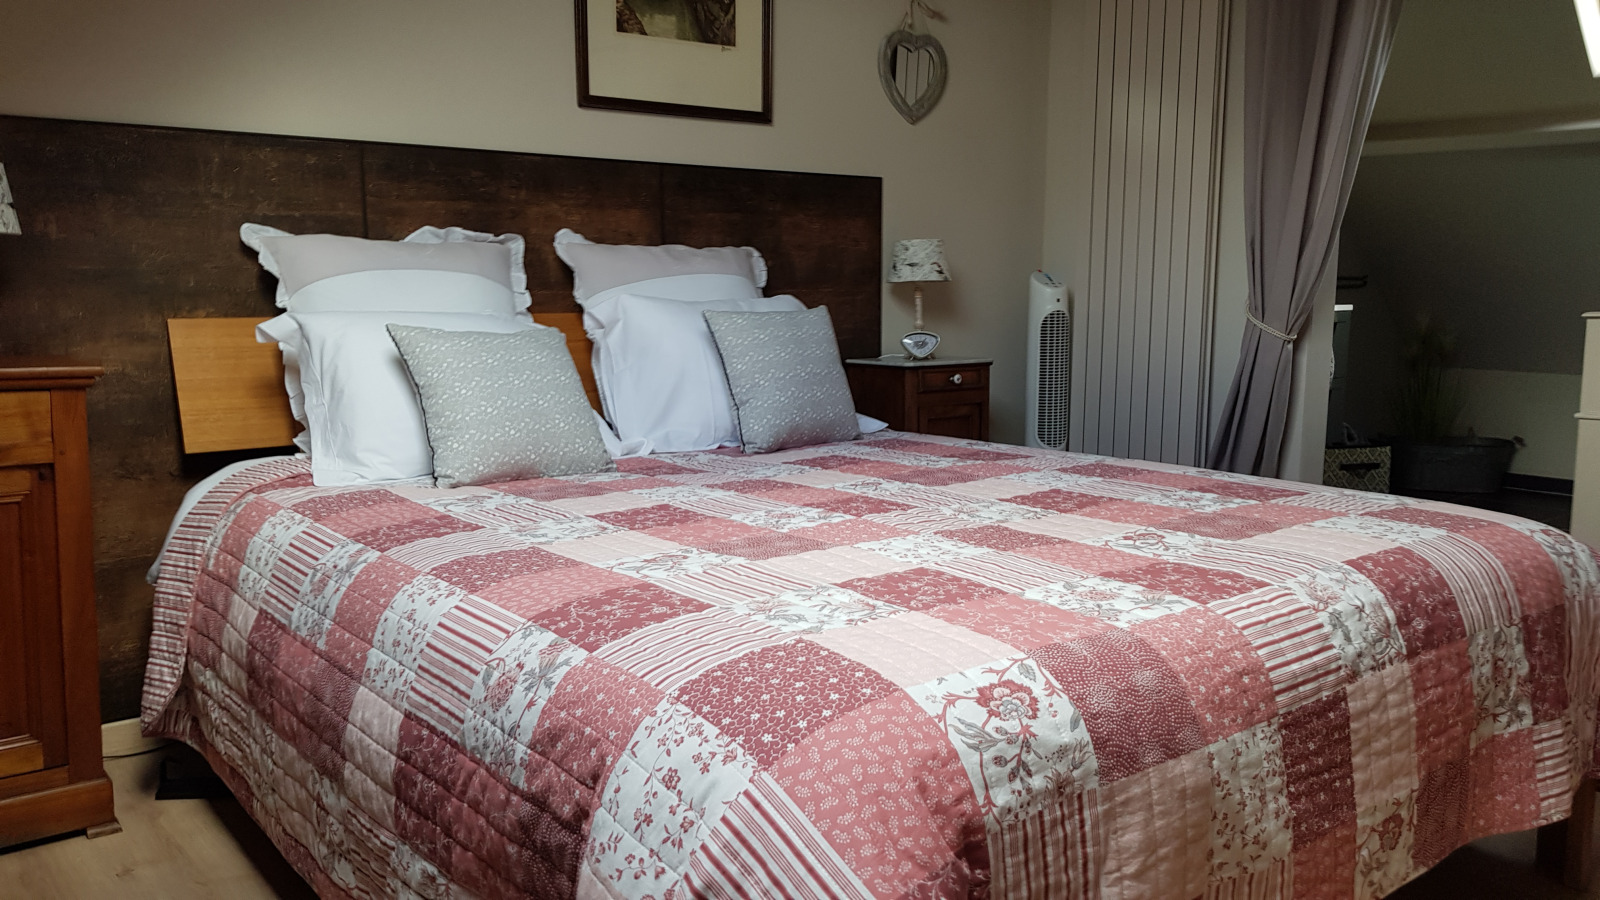 Double bed in the bedroom of Le Roc Paisible accommodation in Havinnes